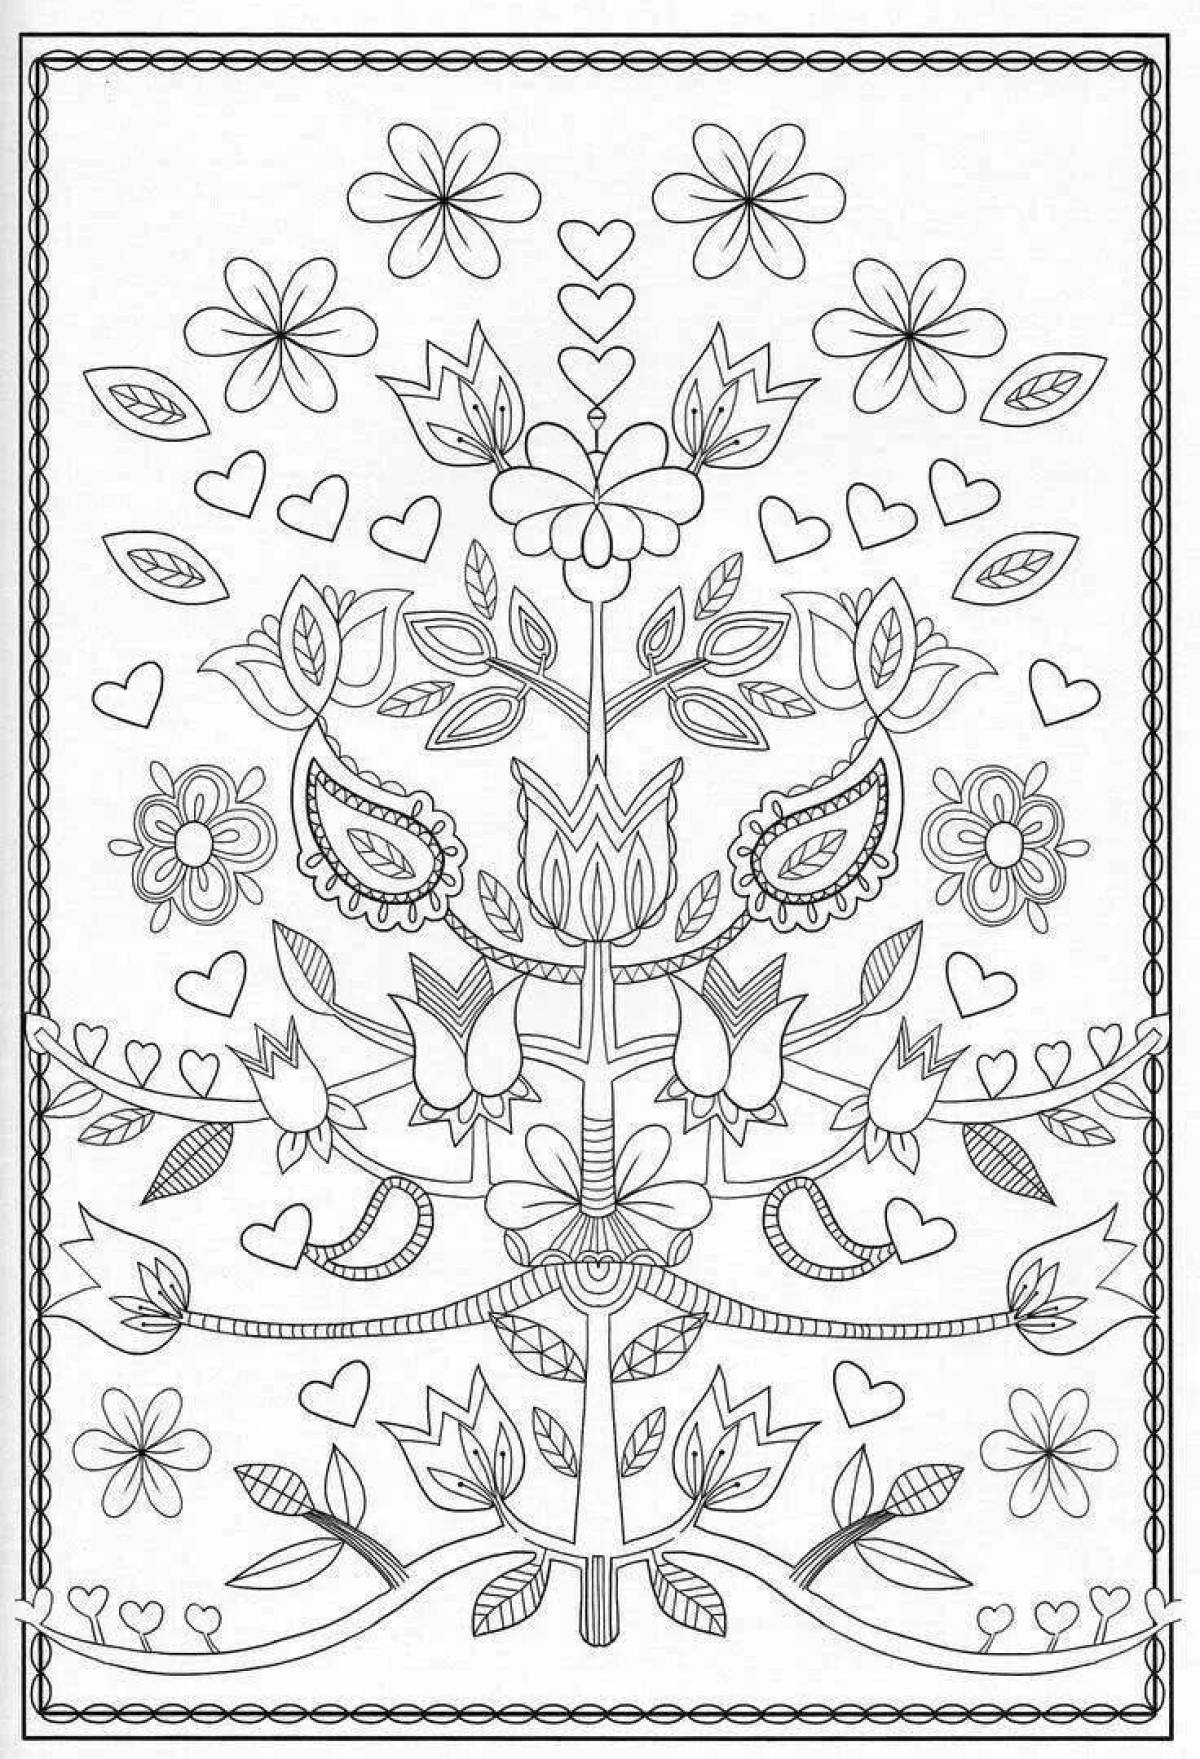 Mysterious towel coloring page